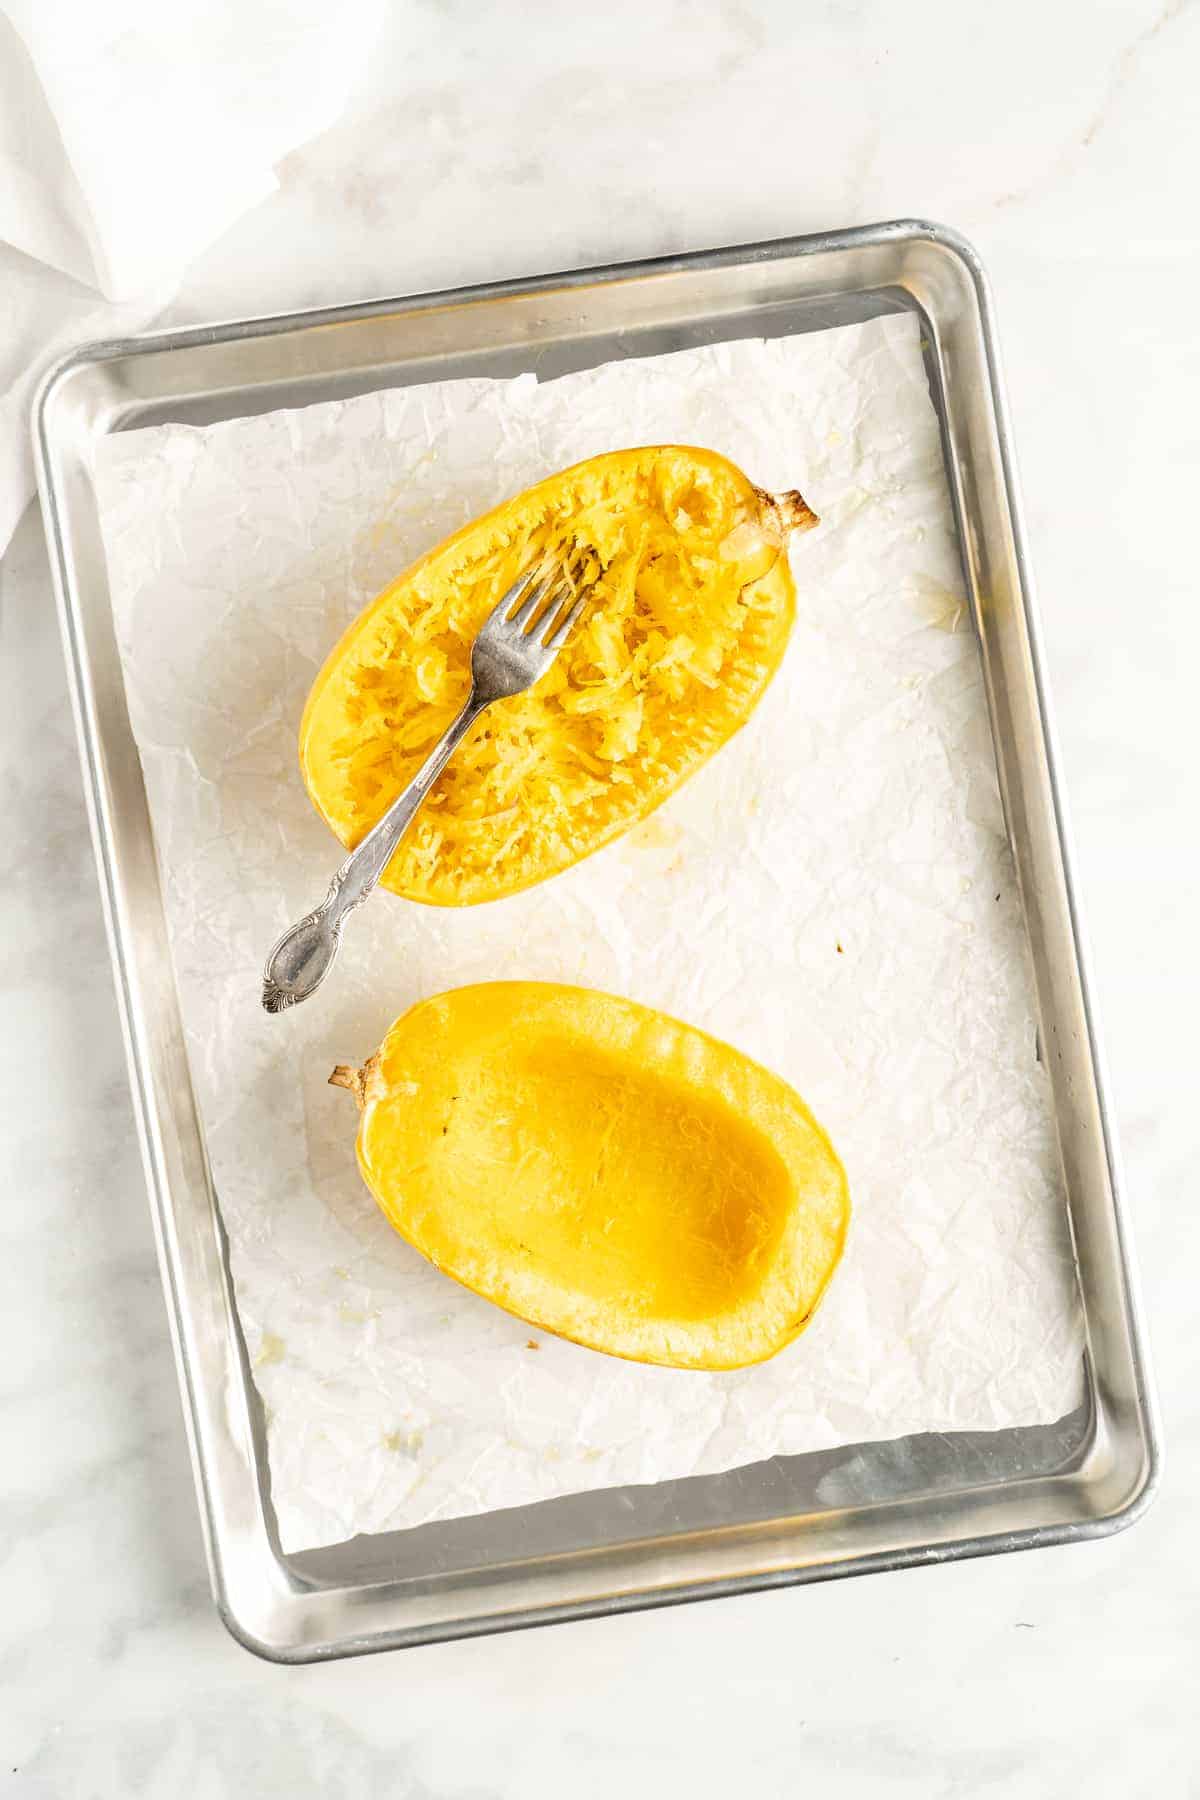 Overhead view of two spaghetti squash halves on parchment lined baking sheet with fork